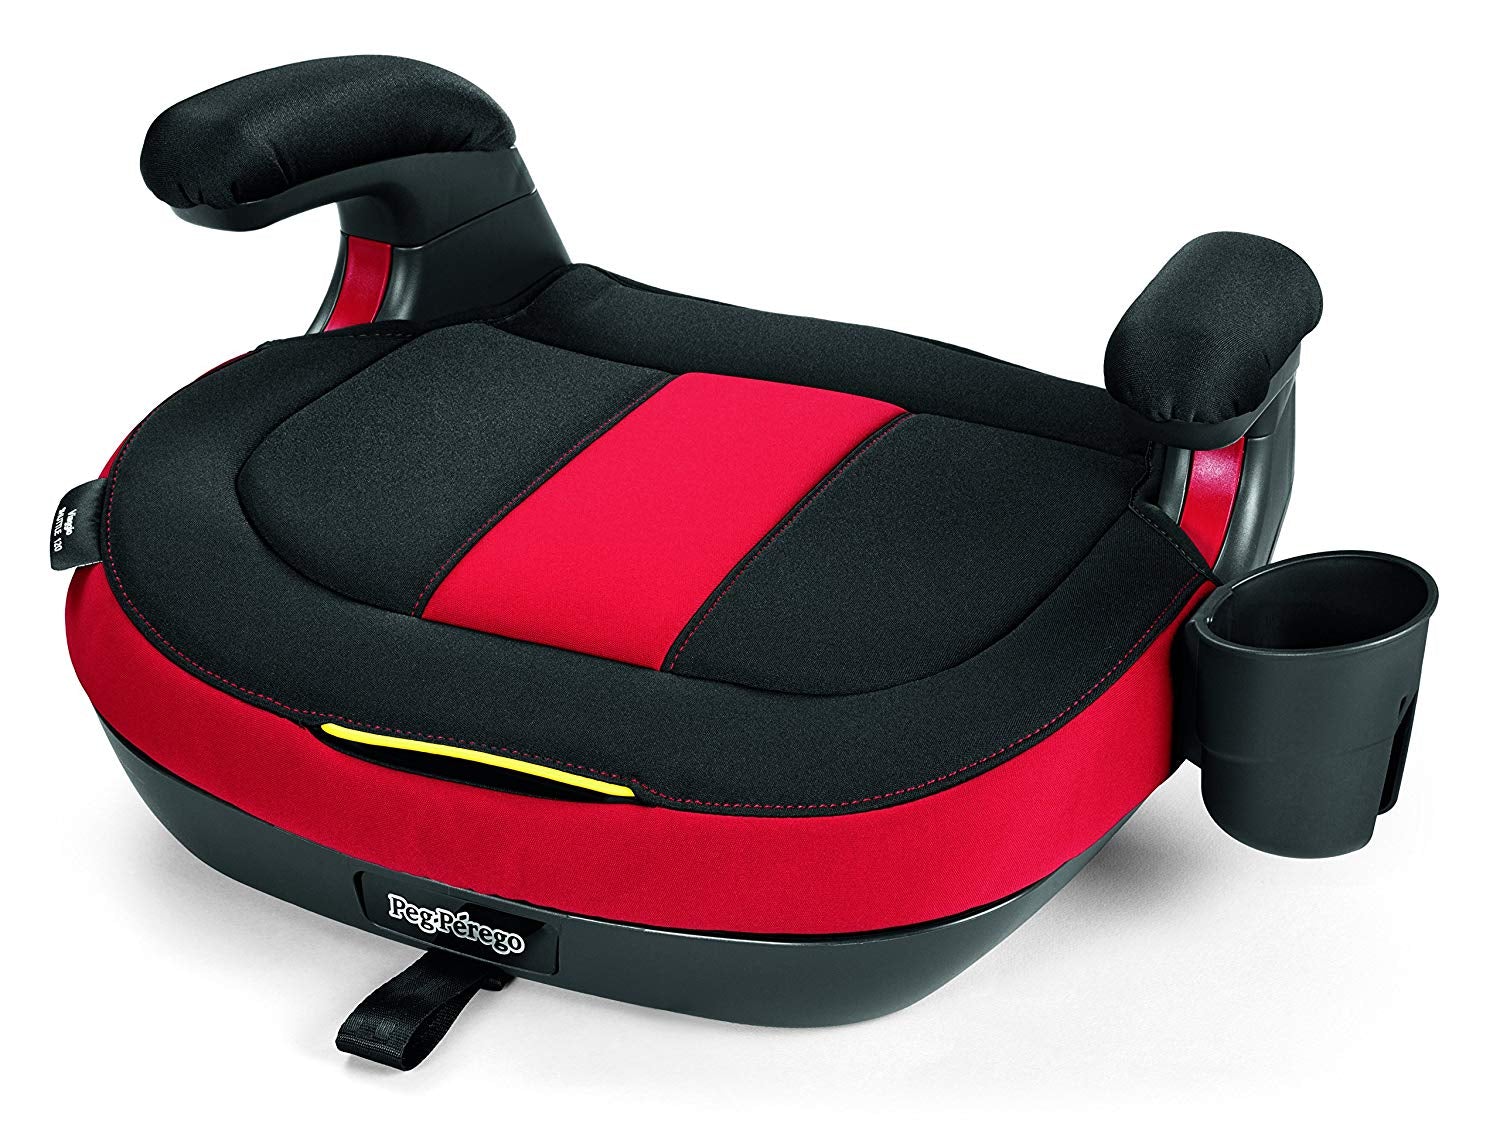 PEG PEREGO Viaggio Shuttle 120 Backless Booster Car Seat - ANB Baby -$100 - $300